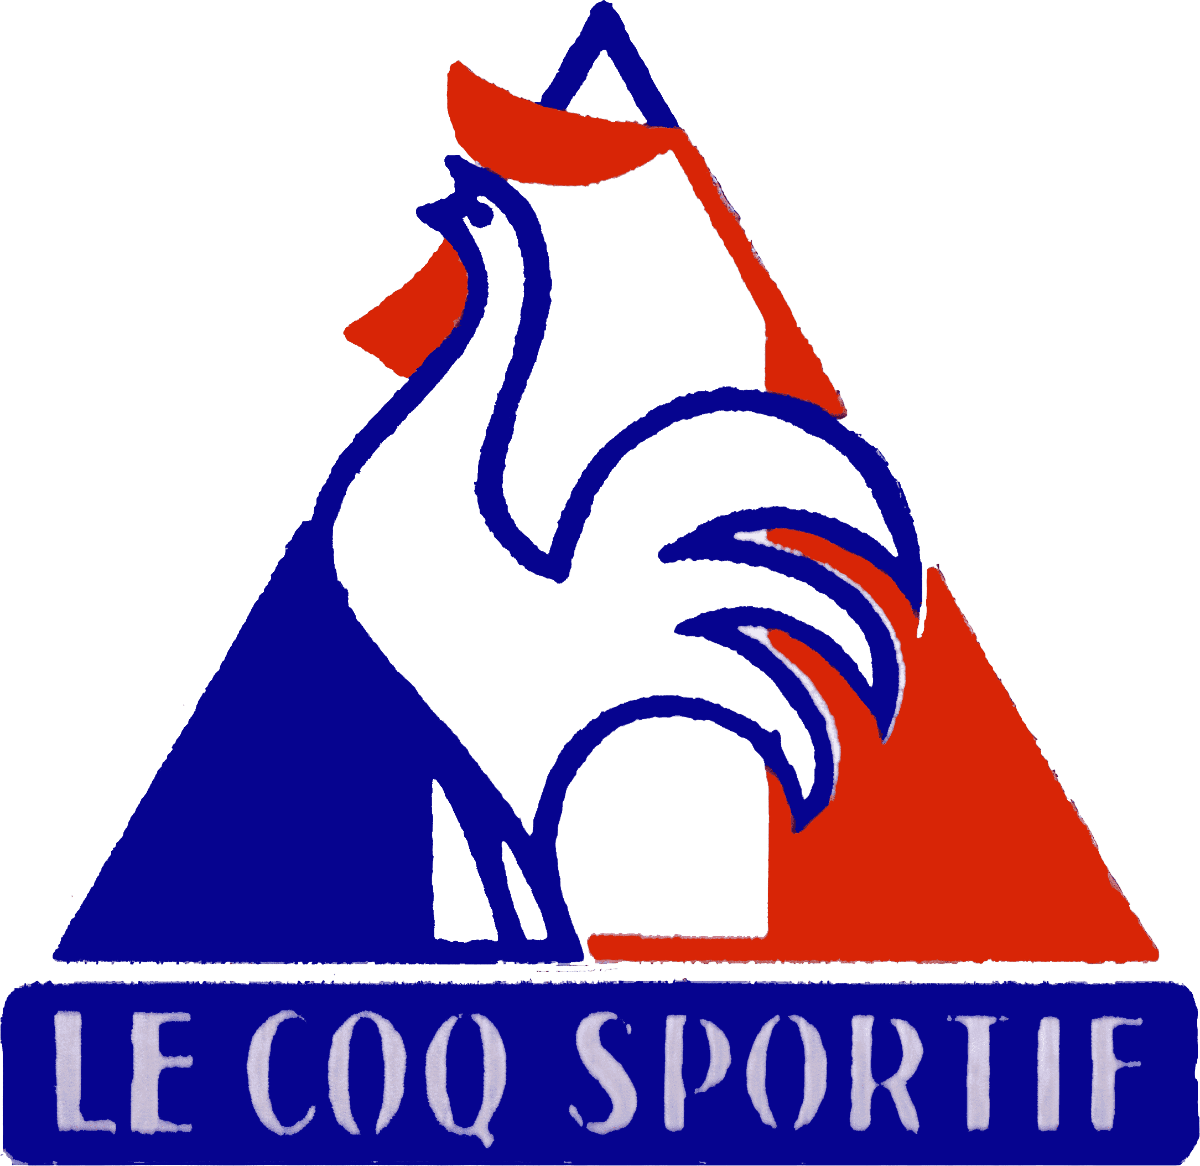 Le Coq Sportif Logo PNG And Vector Logo Download | atelier-yuwa.ciao.jp